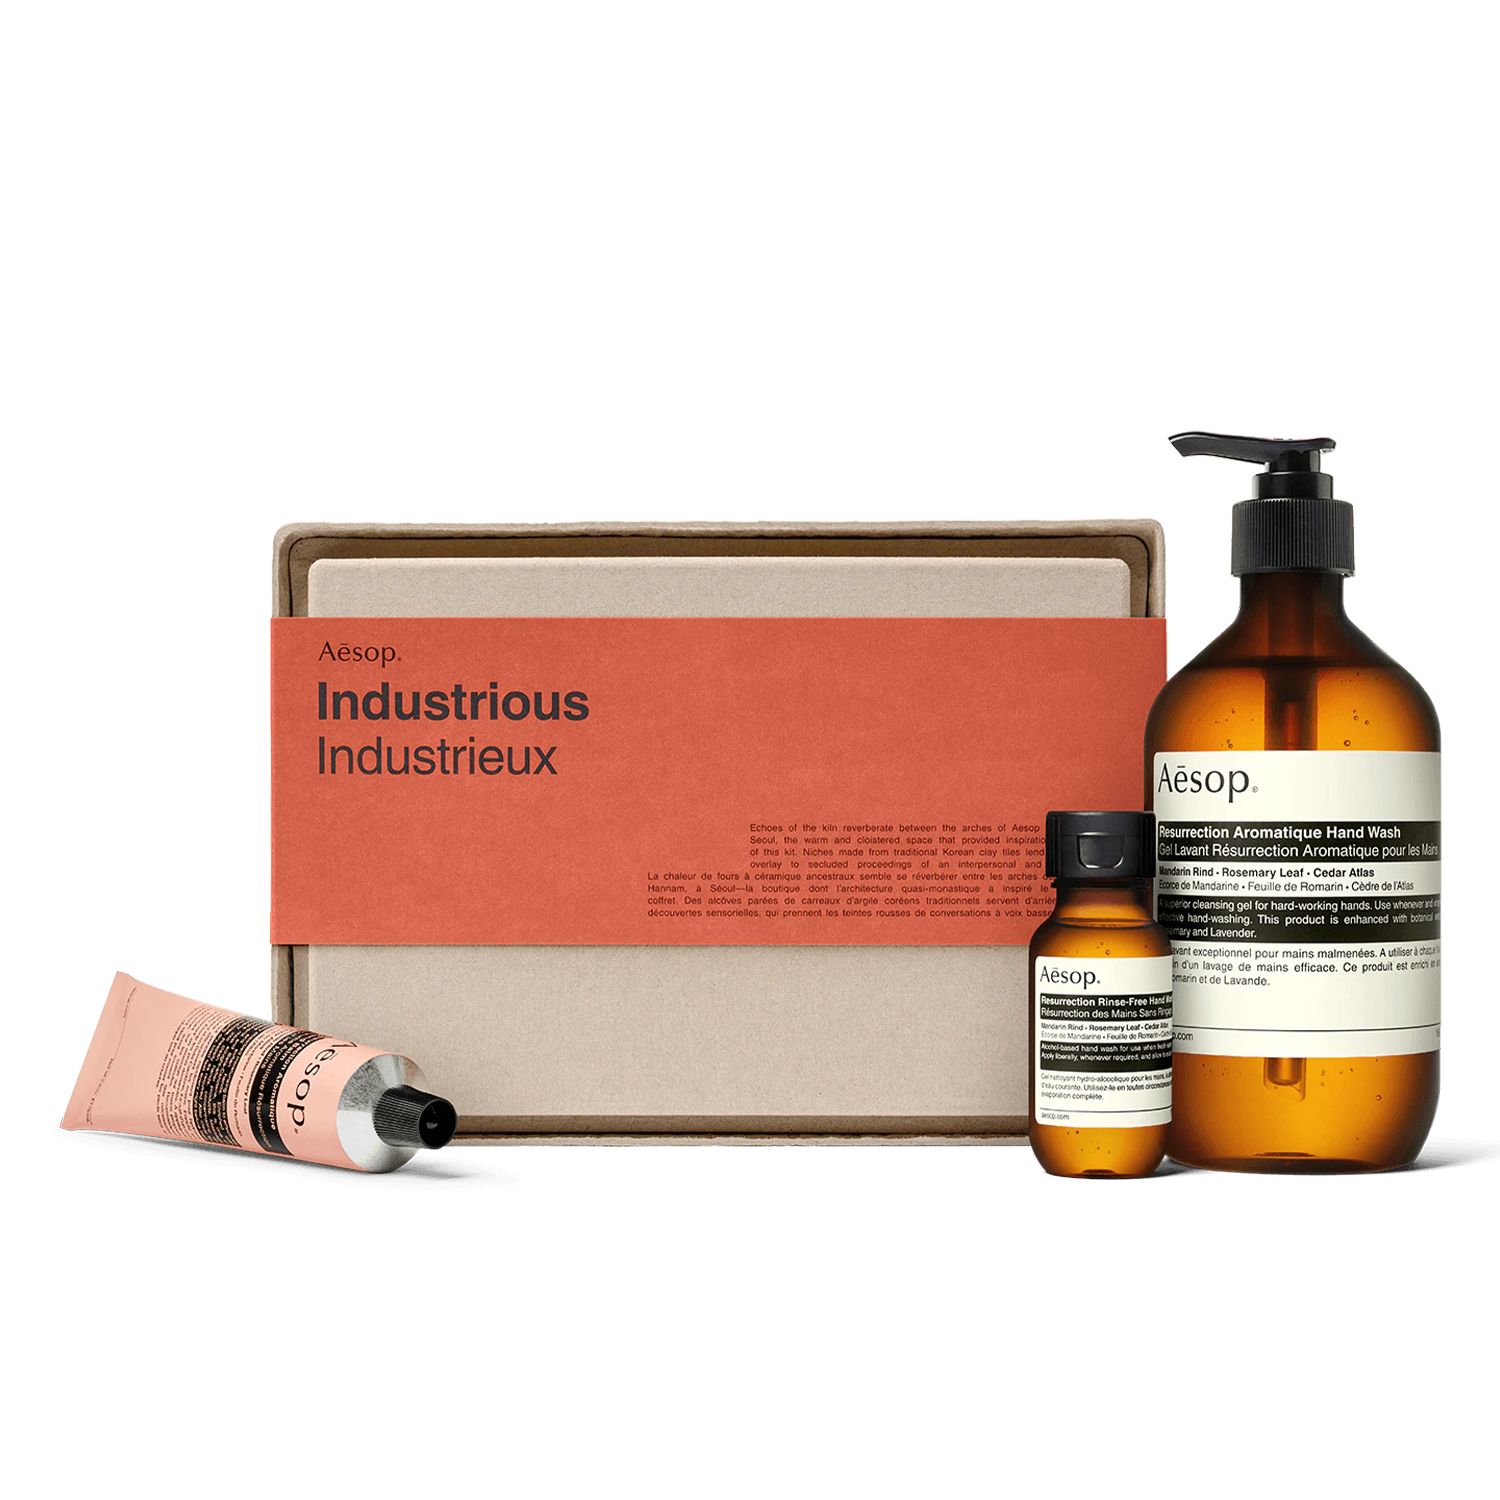 Aesop gift box kit with three products and orange branding